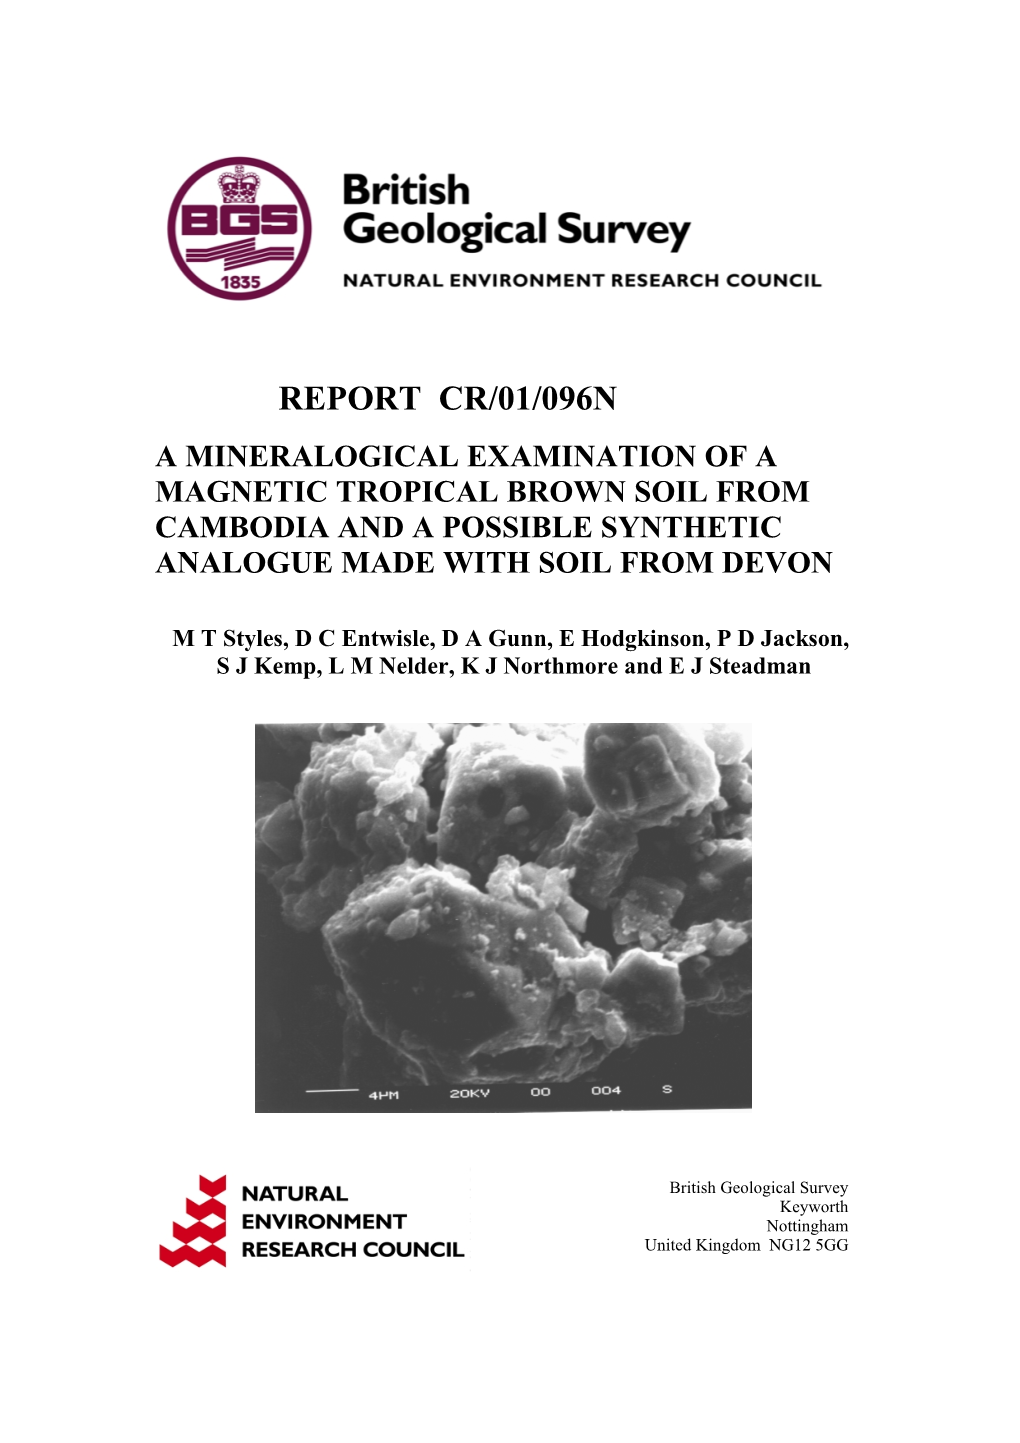 Report Cr/01/096N a Mineralogical Examination of a Magnetic Tropical Brown Soil from Cambodia and a Possible Synthetic Analogue Made with Soil from Devon